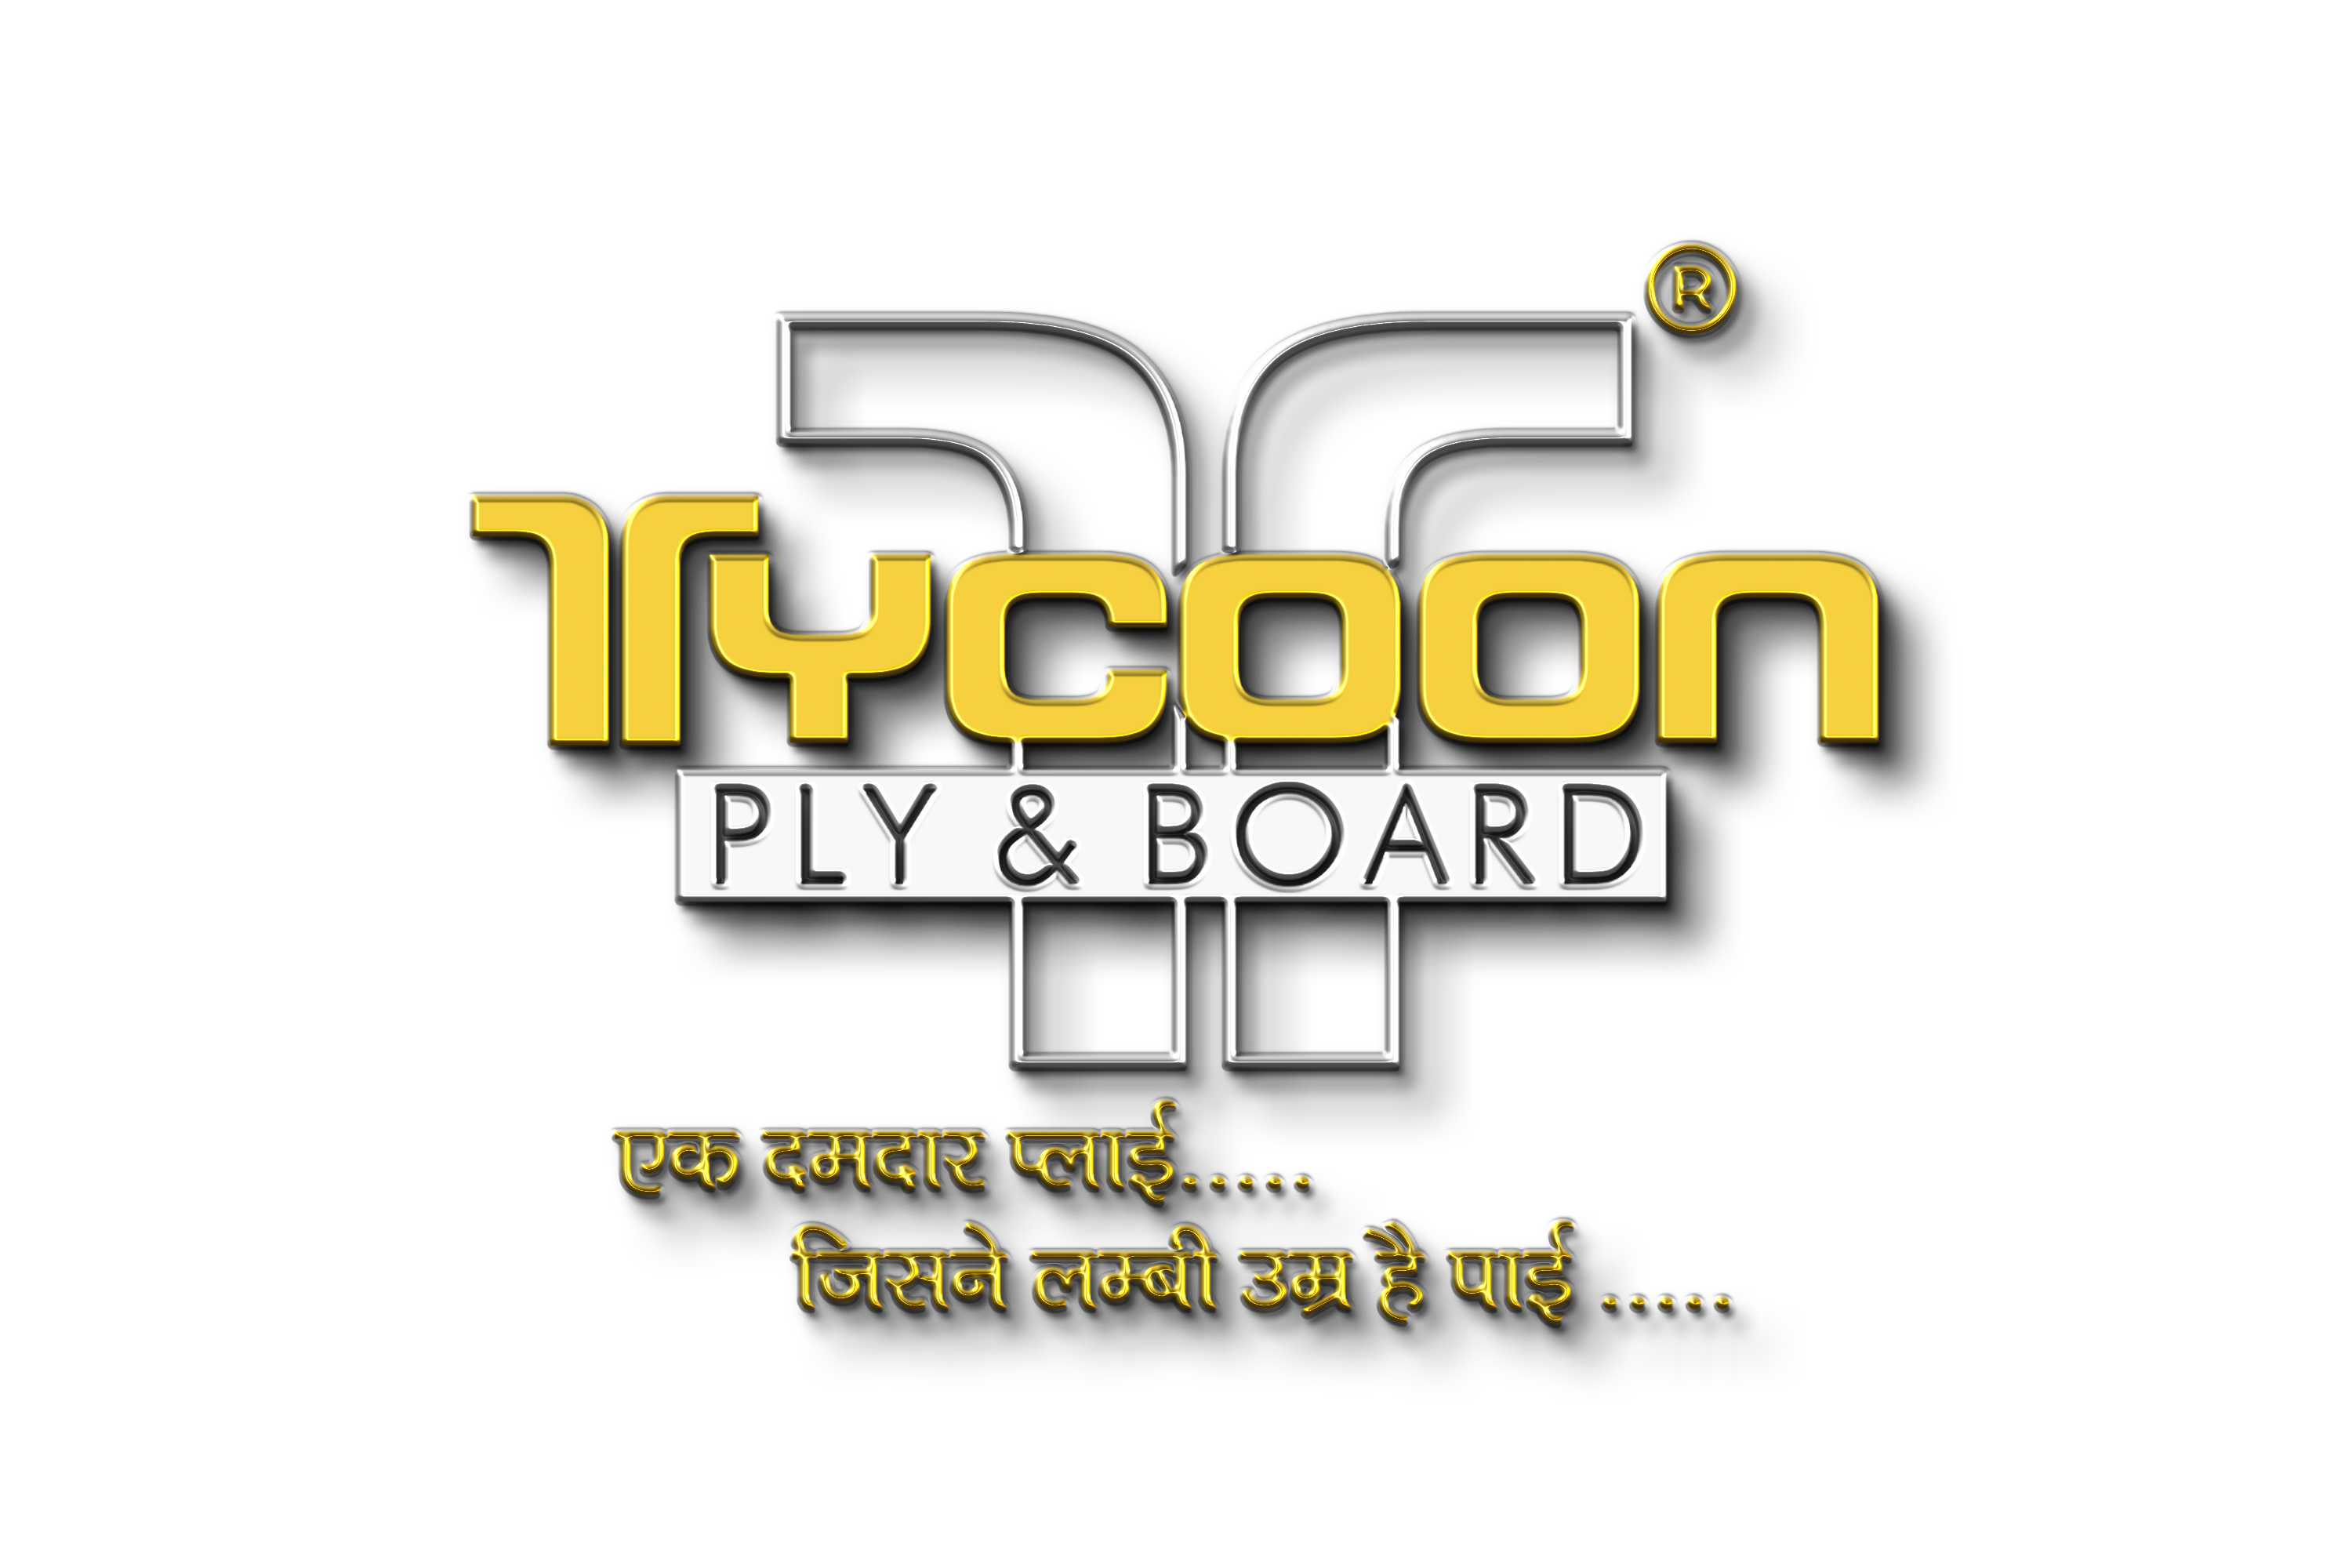 Tycoon Plywood - Unmatched Strength and Quality